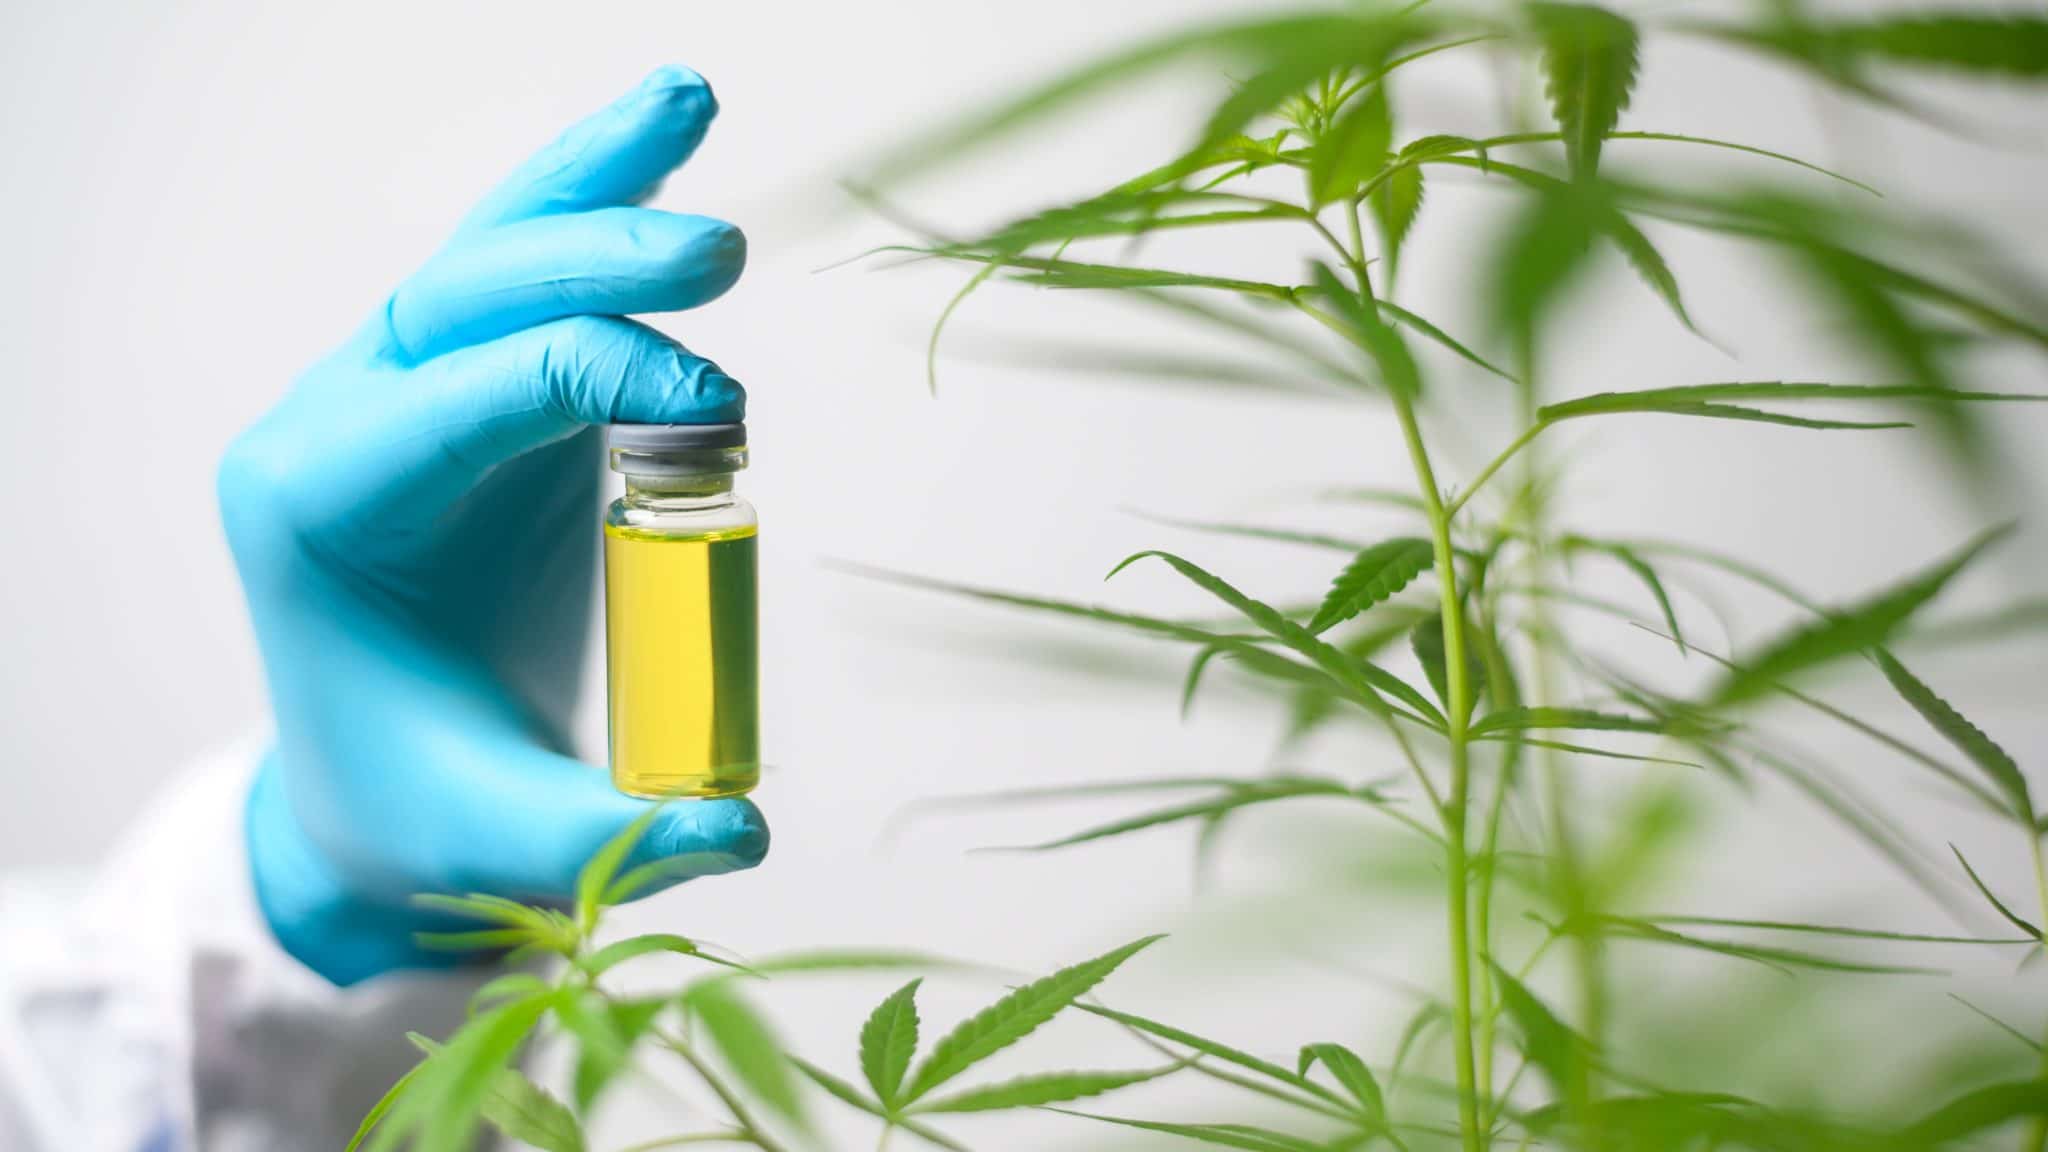 Learn about the best CBD oils here